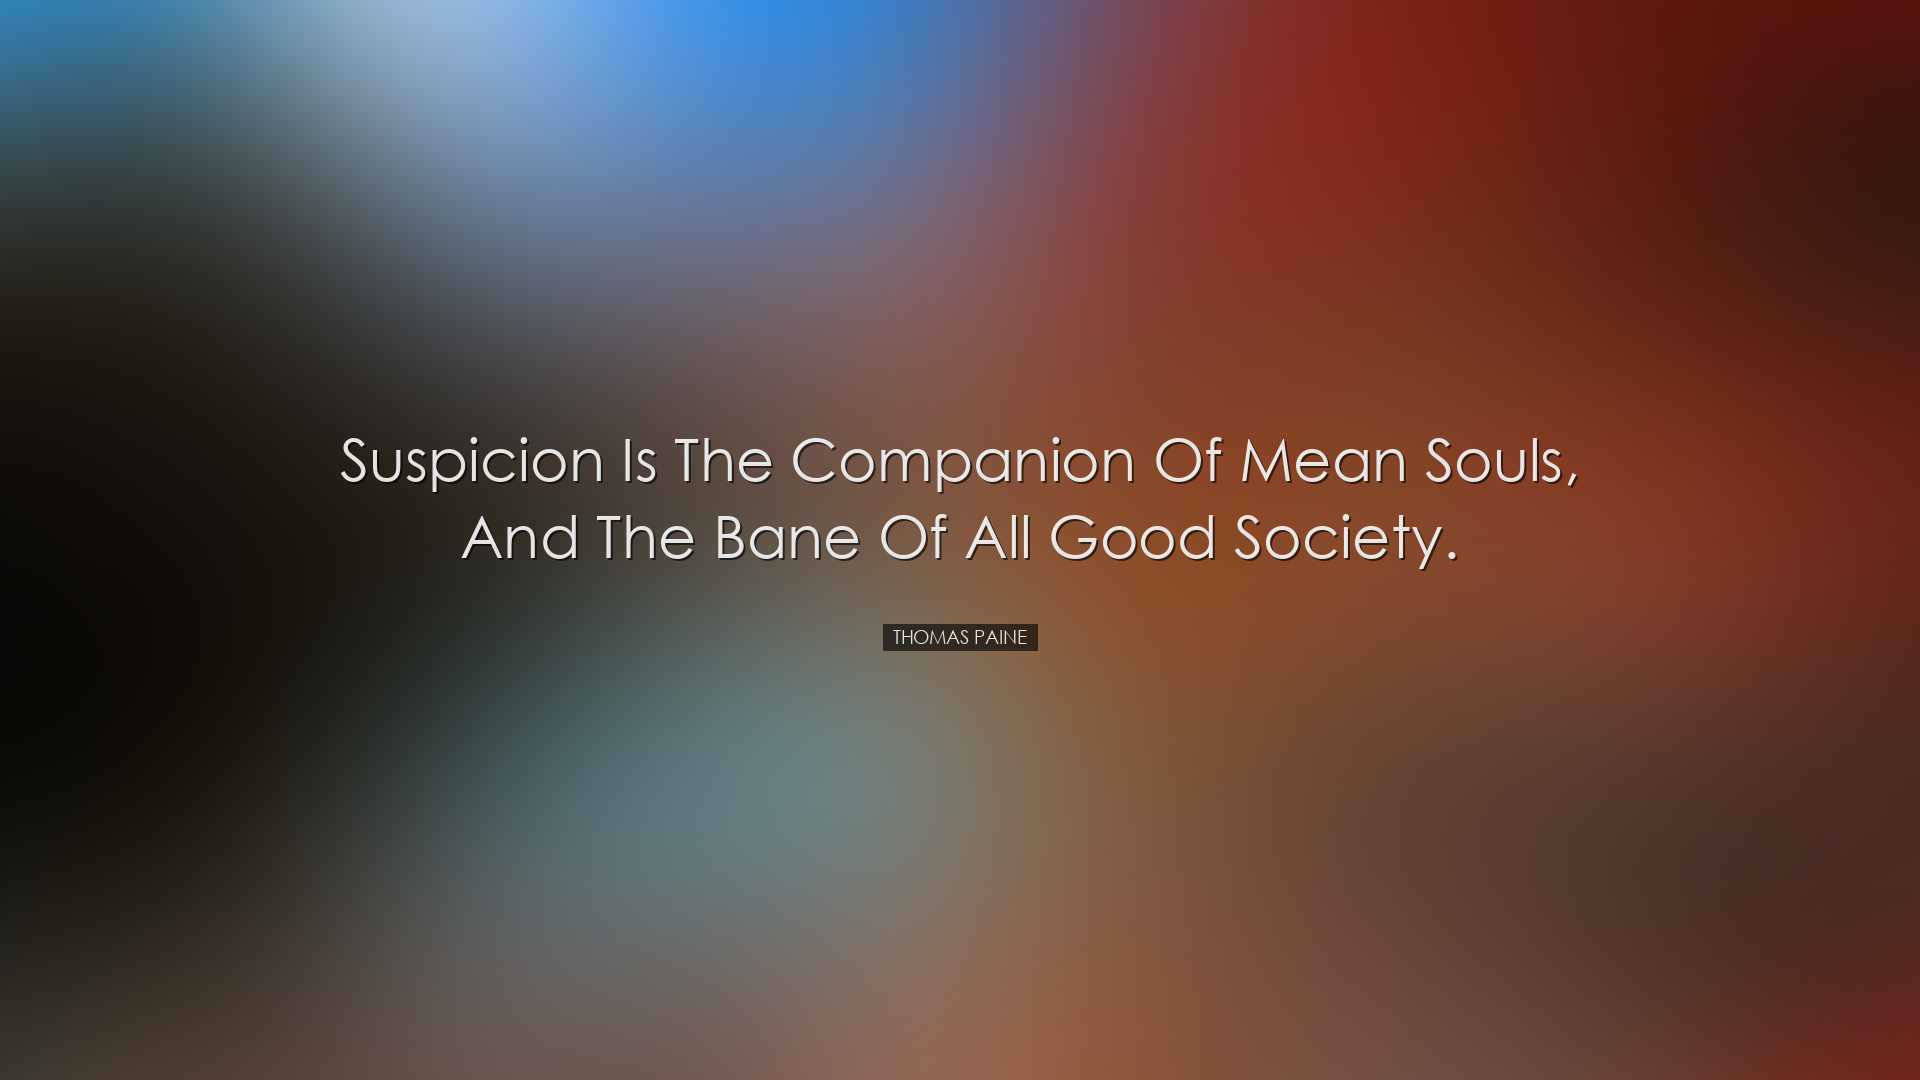 Suspicion is the companion of mean souls, and the bane of all good